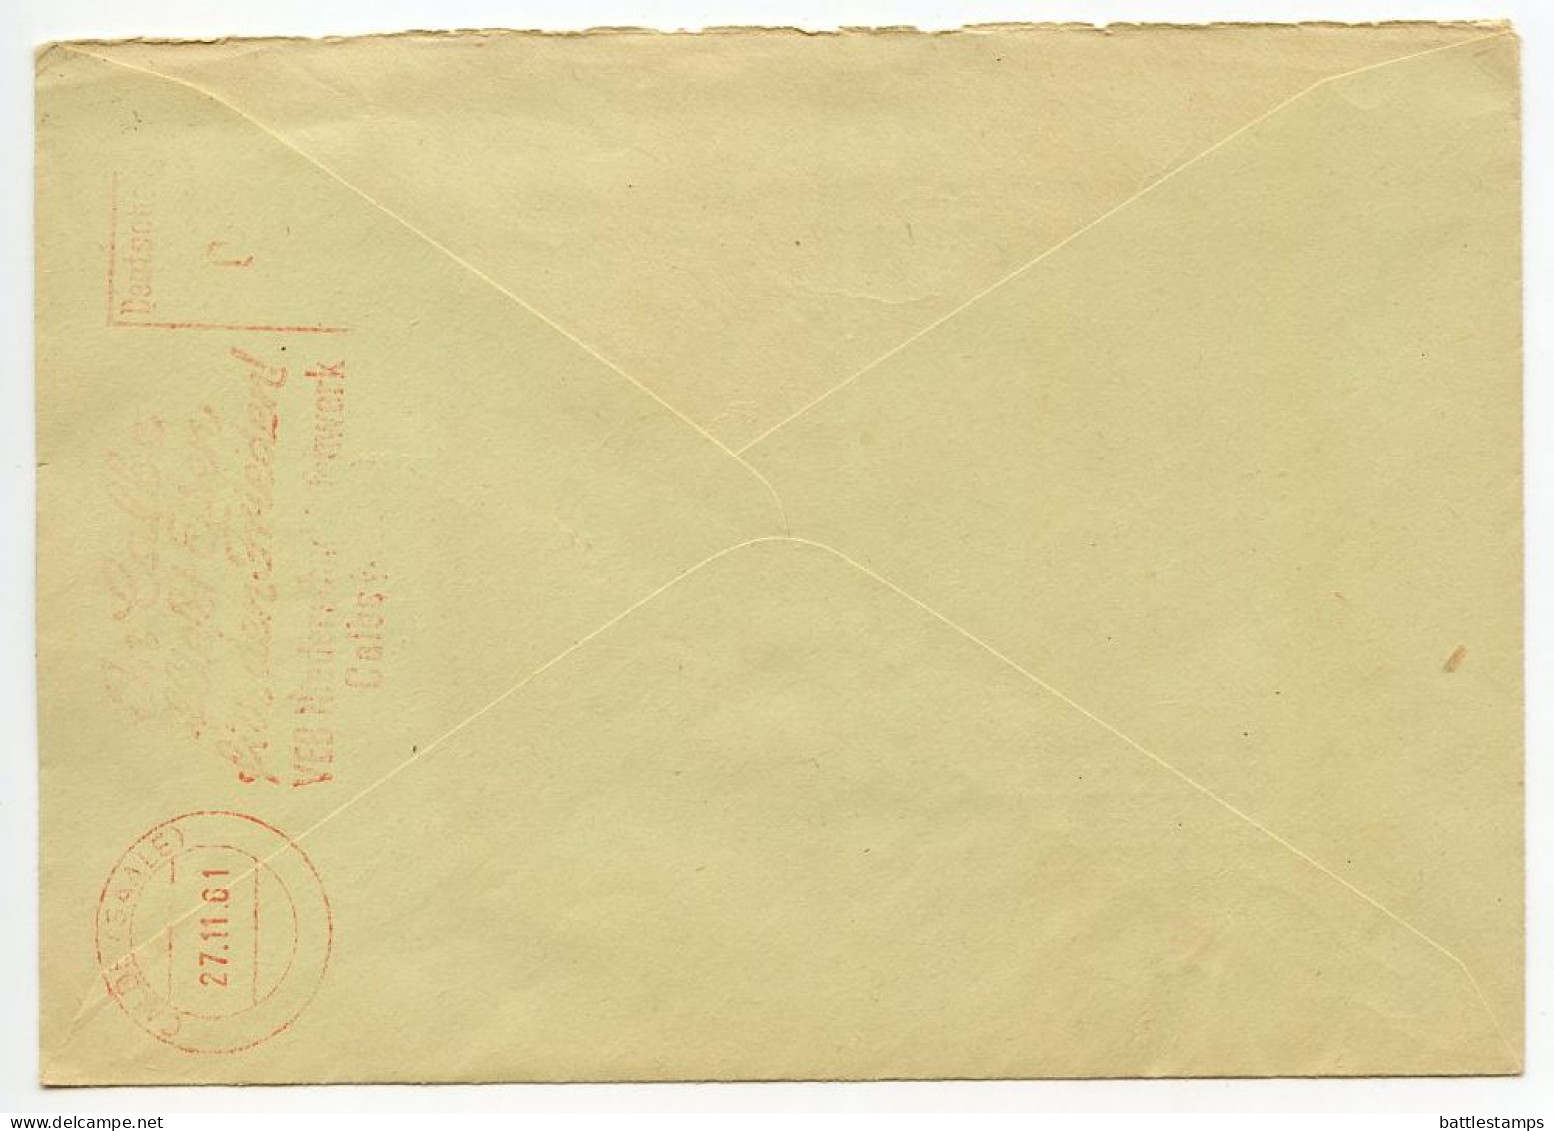 Germany, East 1961 Cover; Calbe (Saale) To Schönebeck (Elbe); 10pf. Machinists Stamp; Meter Slogan With Null Value - Lettres & Documents